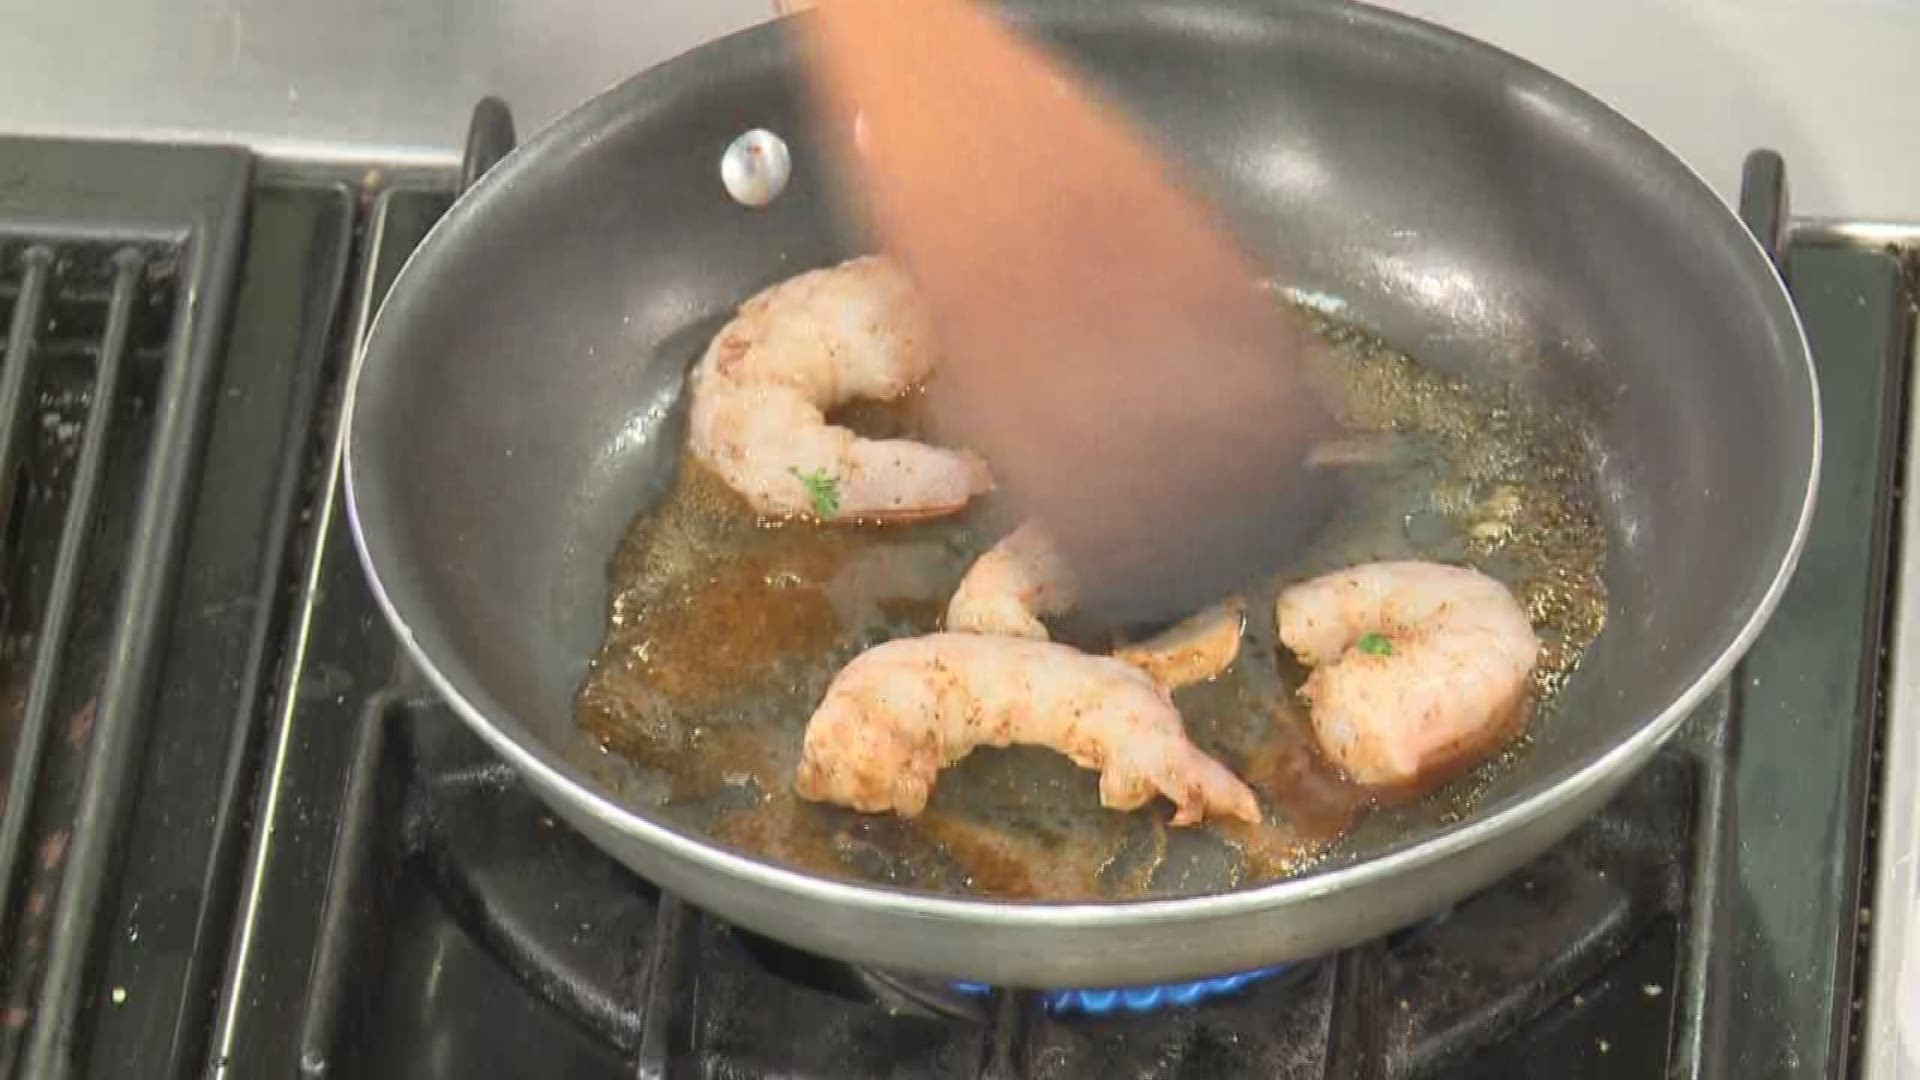 Chef Kevin Belton shows how to make shrimp and grits - his secret, cook the grits over low heat for at least 20 minutes.